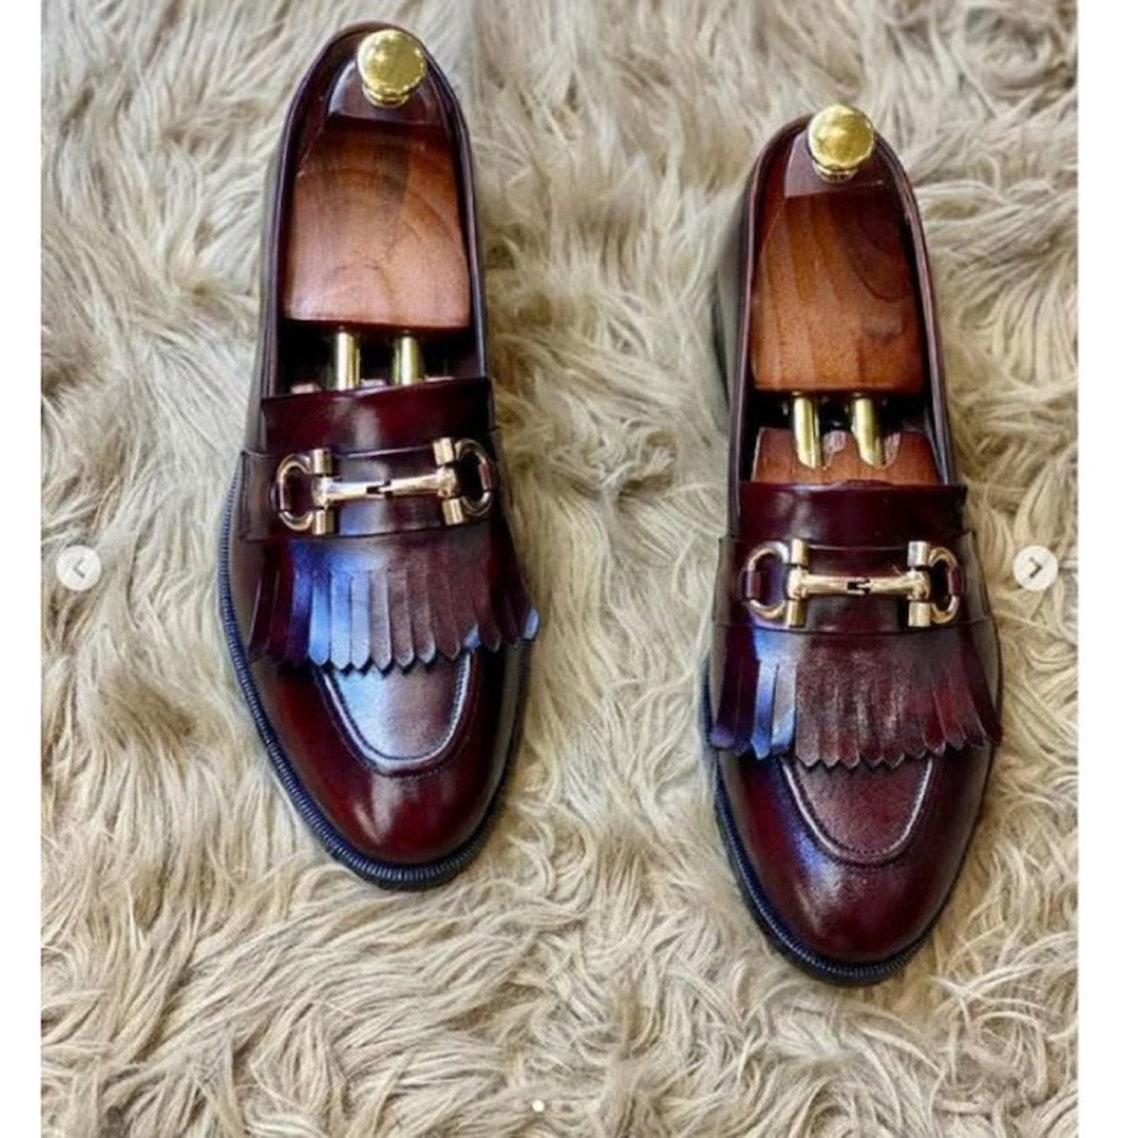 Handmade Leather Penny Loafer Shoes, Moccasin Shoes, Slip on Shoes, Men ...